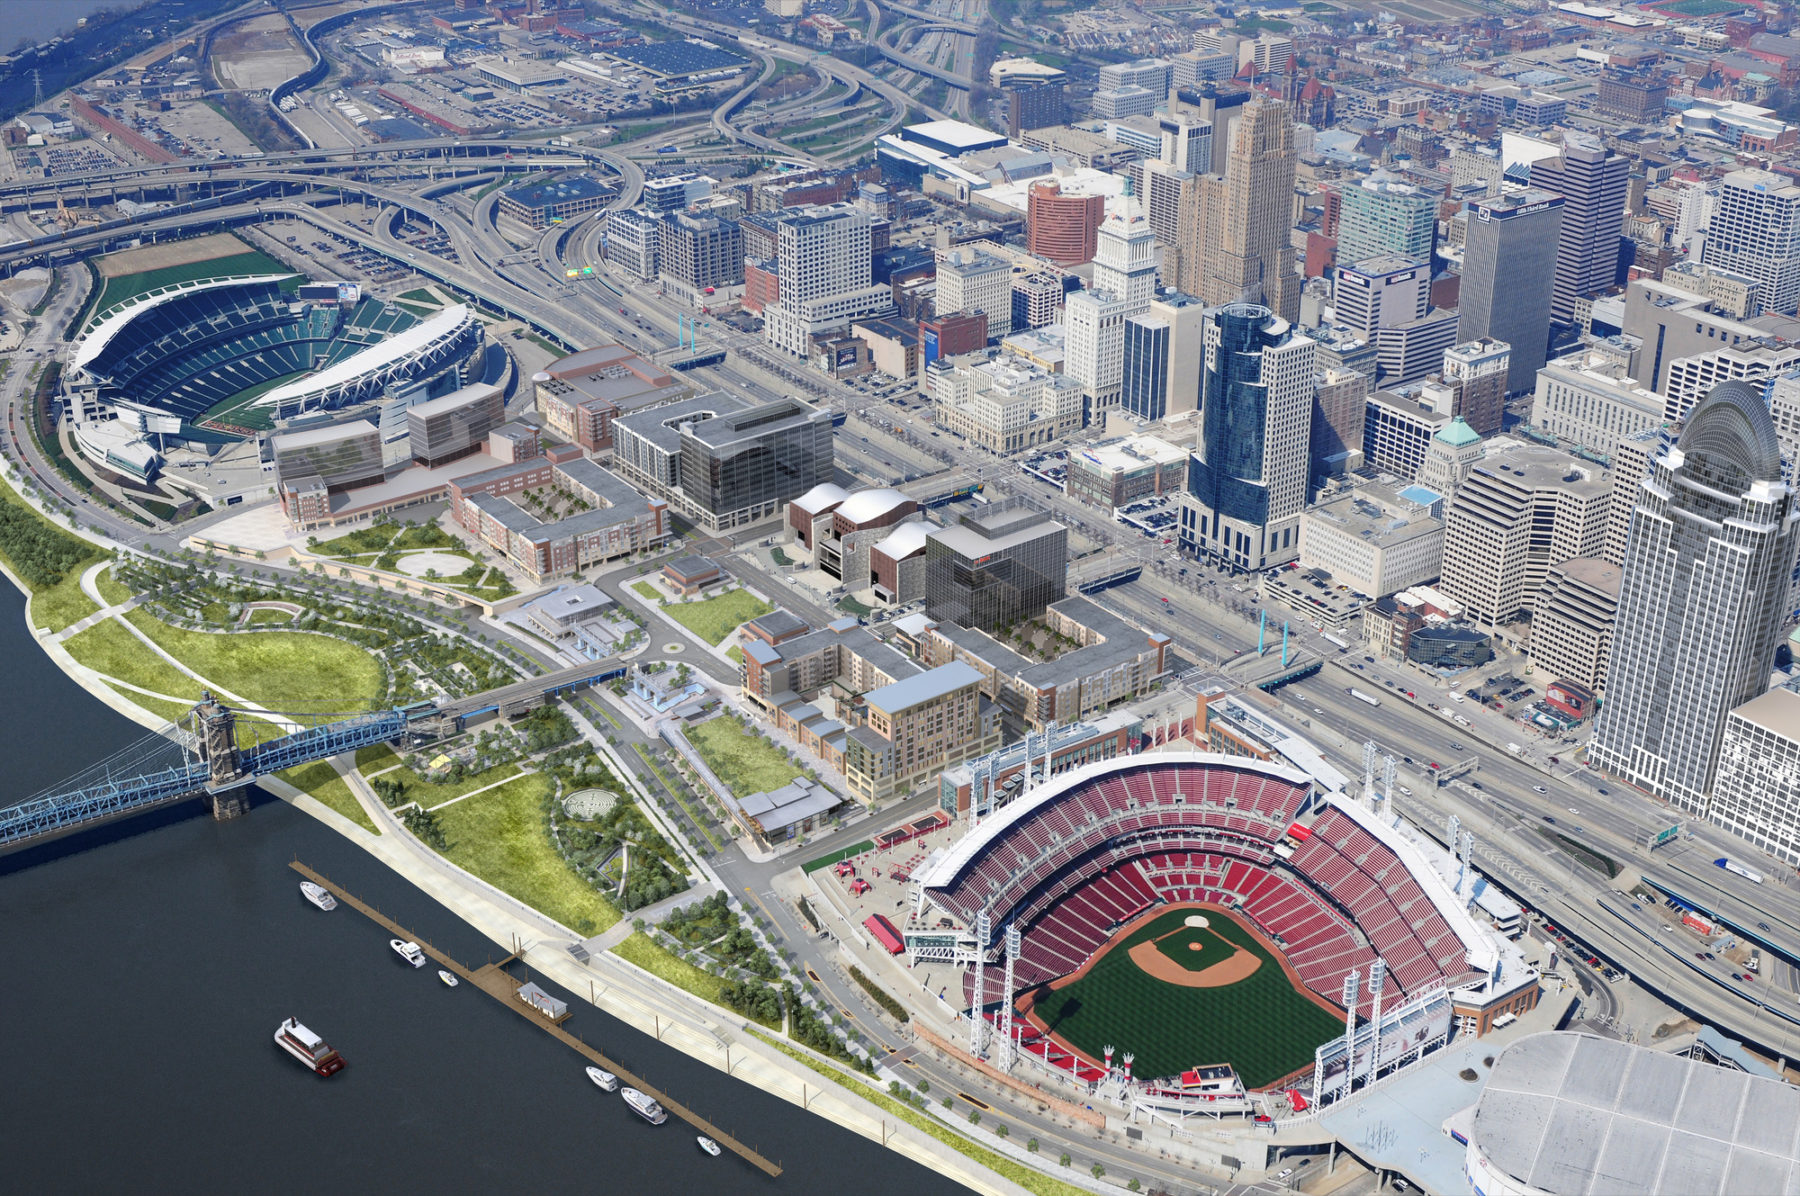 Aerial view of the Cincinnati John G. and Phyllis W. Smale Riverfront Park